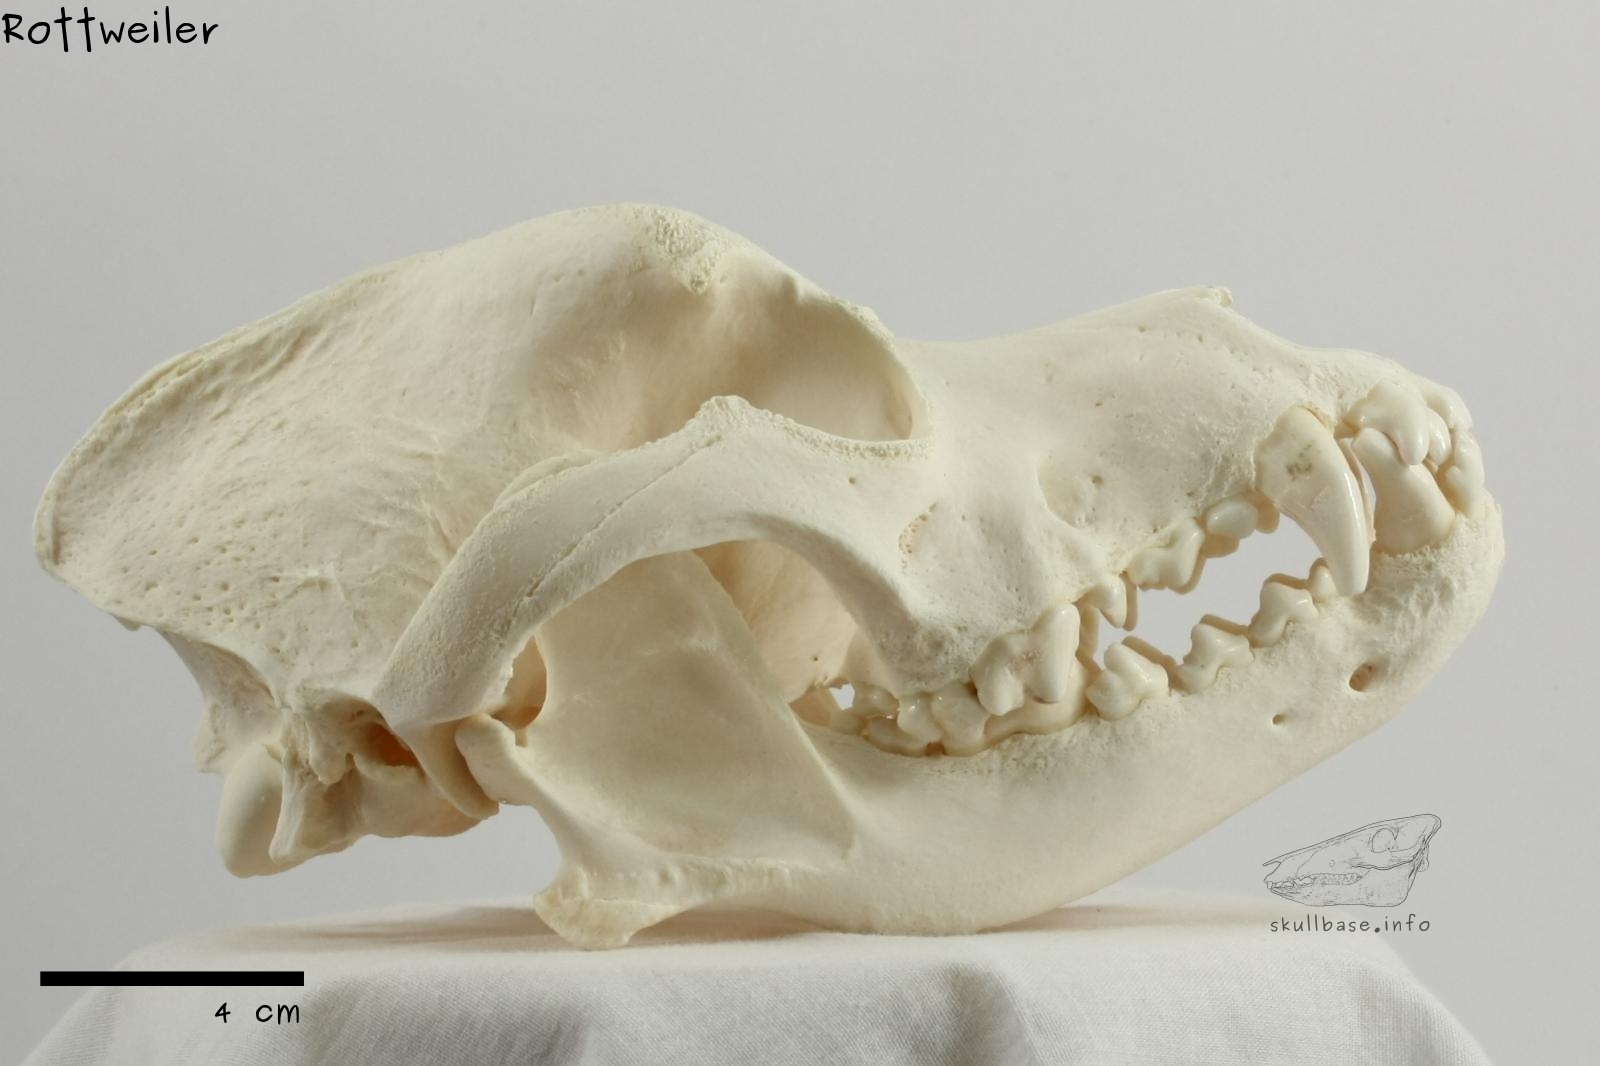 Rottweiler (Canis lupus familiaris) skull lateral view